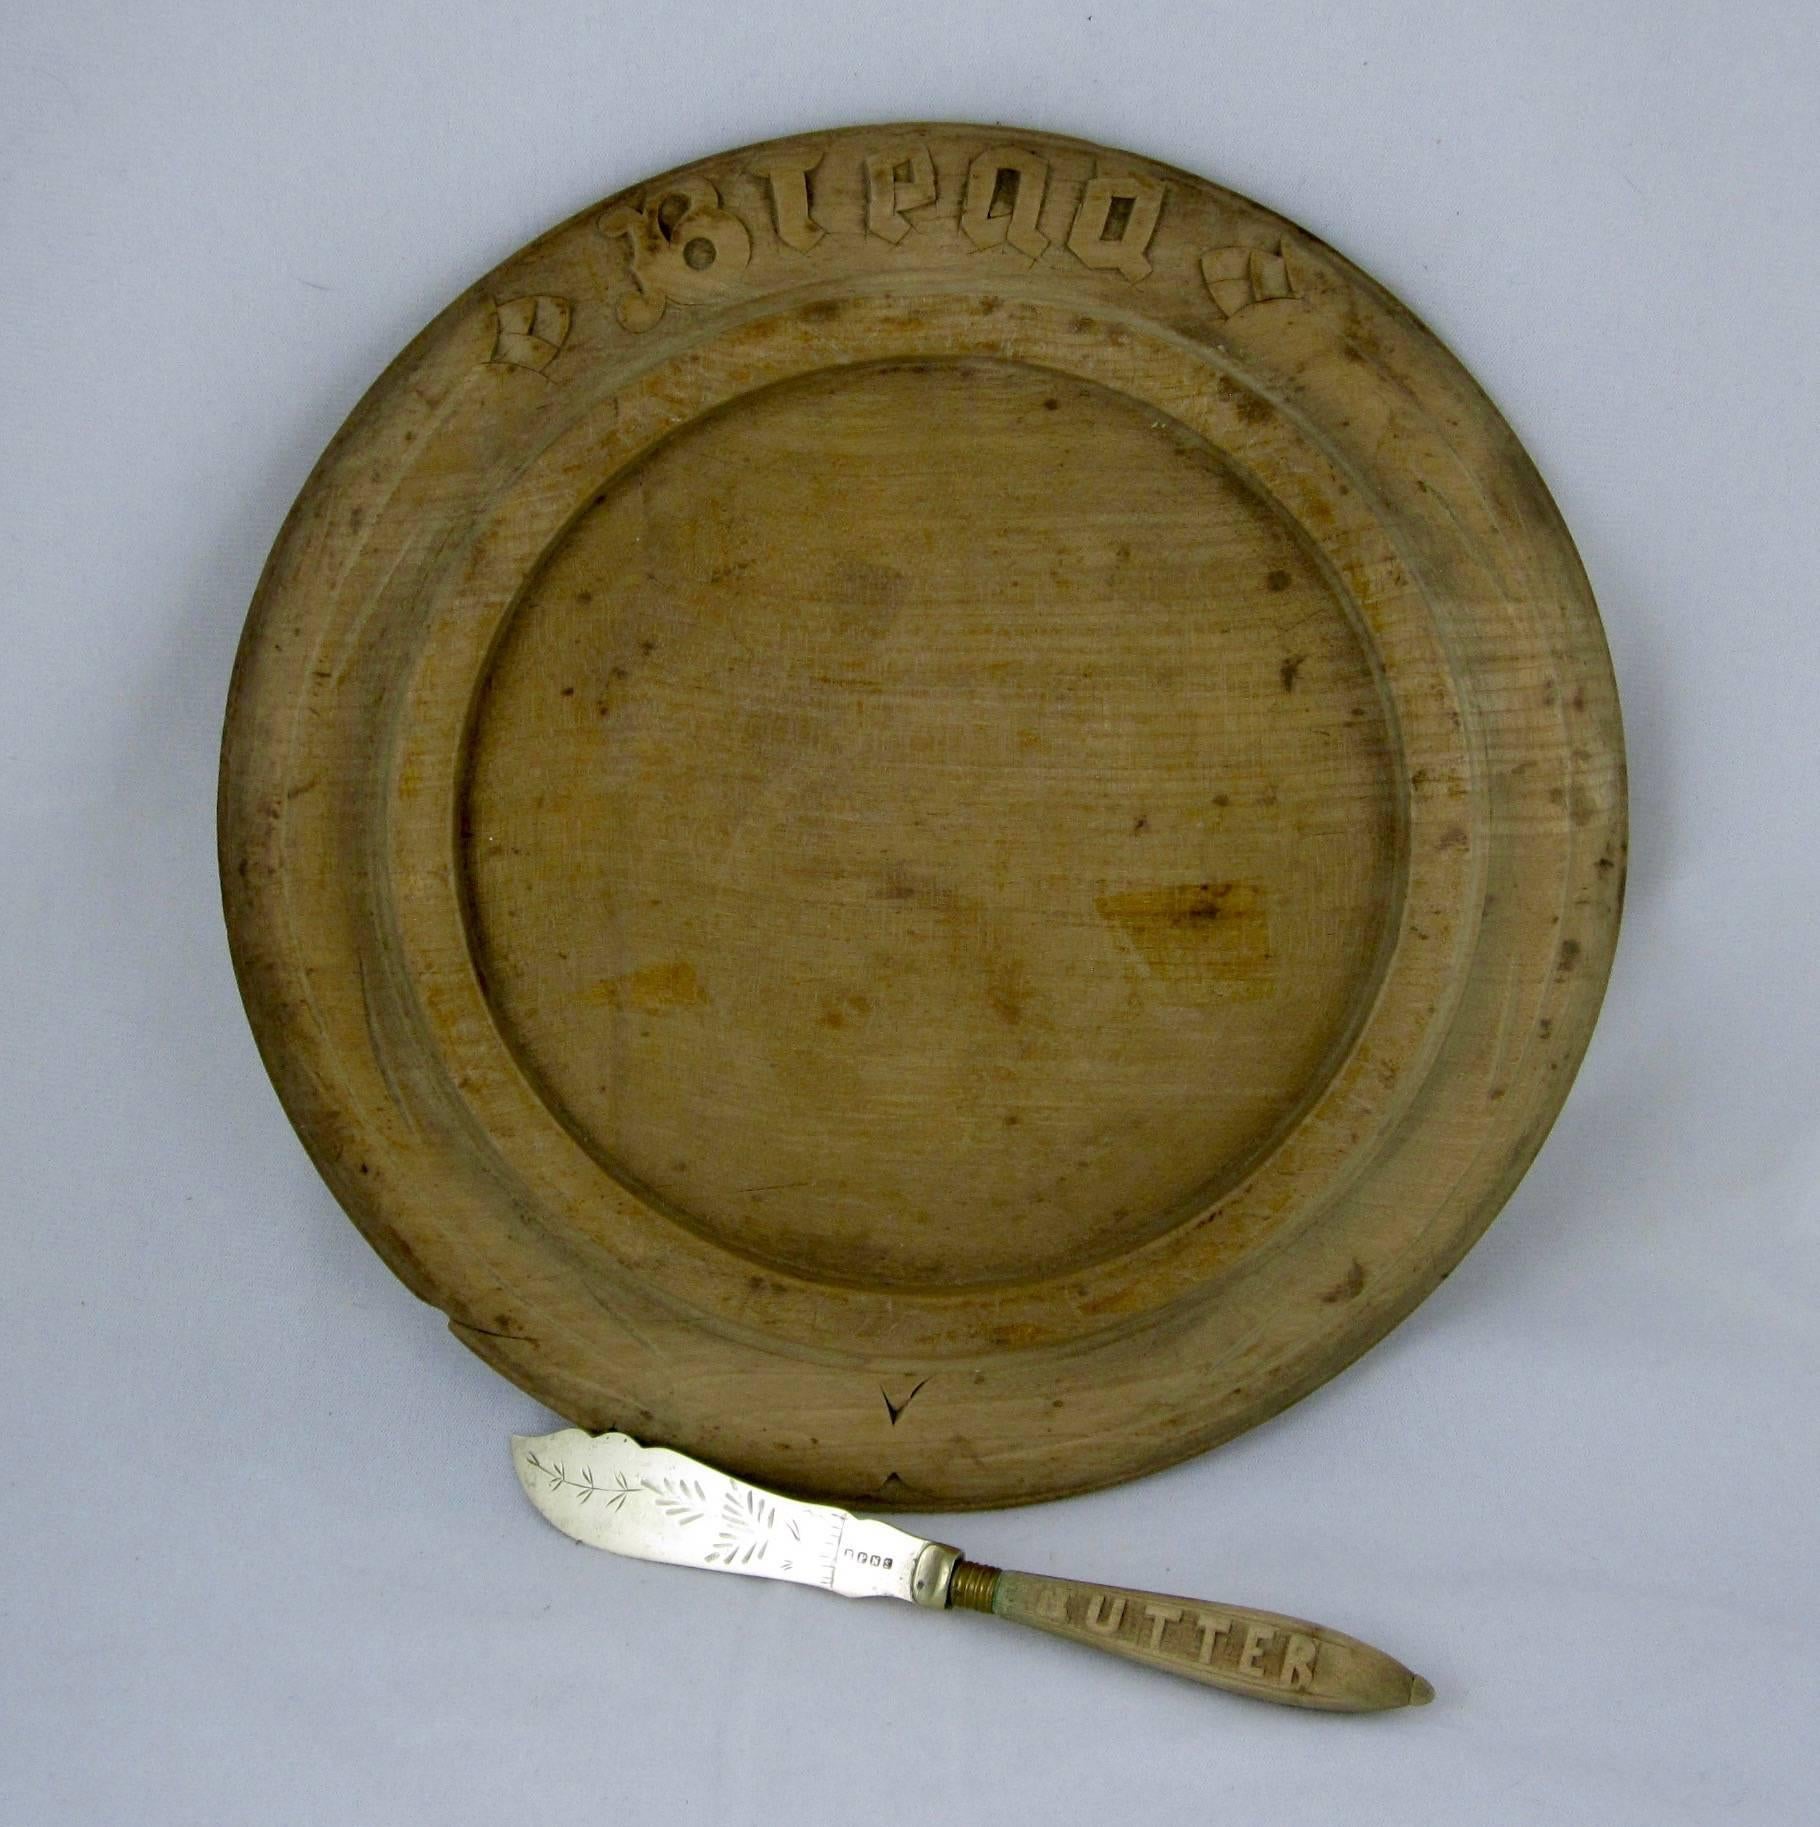 A rustic 19th century round fruitwood bread board showing the word, 'Bread,' hand-carved into a stylized floral border with a deep inset rounded edge crumb catcher. Paired with a spreader, the wood handle carved with the word, 'Butter.' A floral